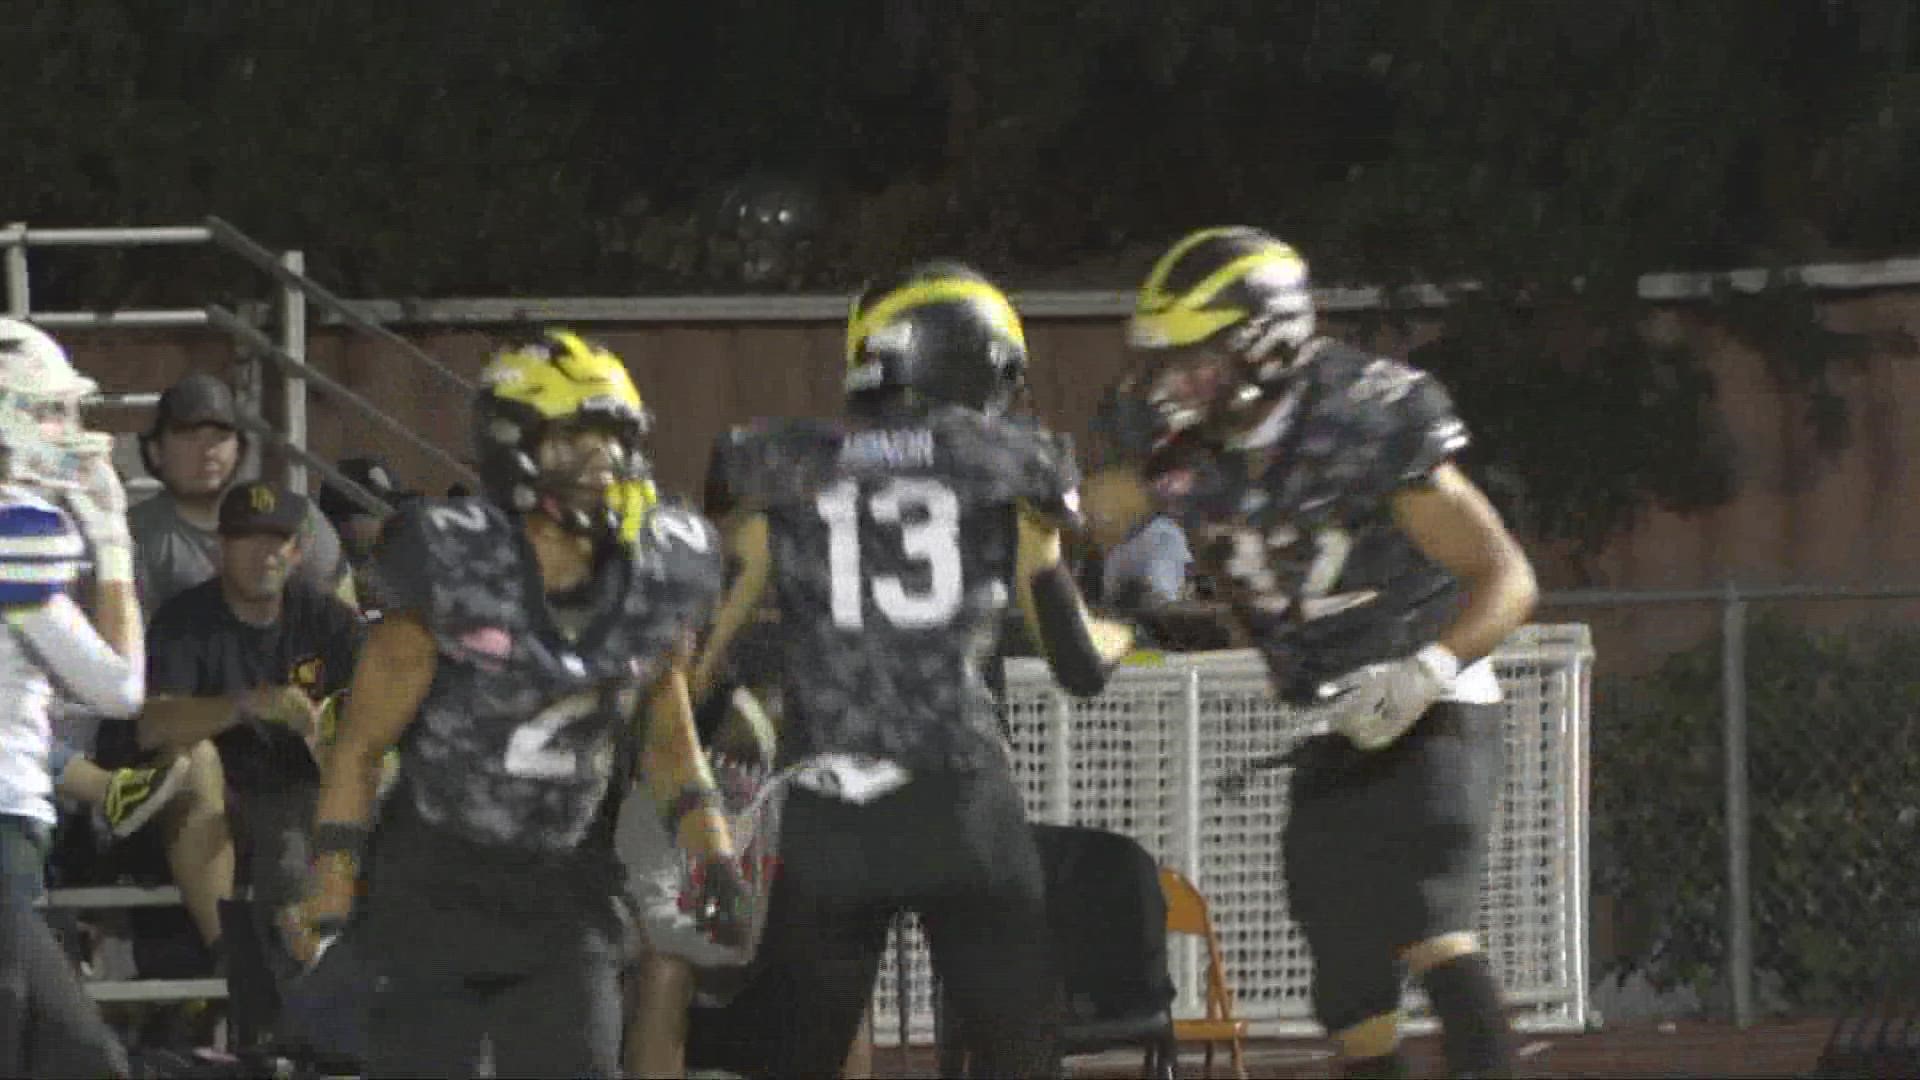 The Del Oro Golden Eagles has been dominant. They stand undefeated as the high school football season is underway.